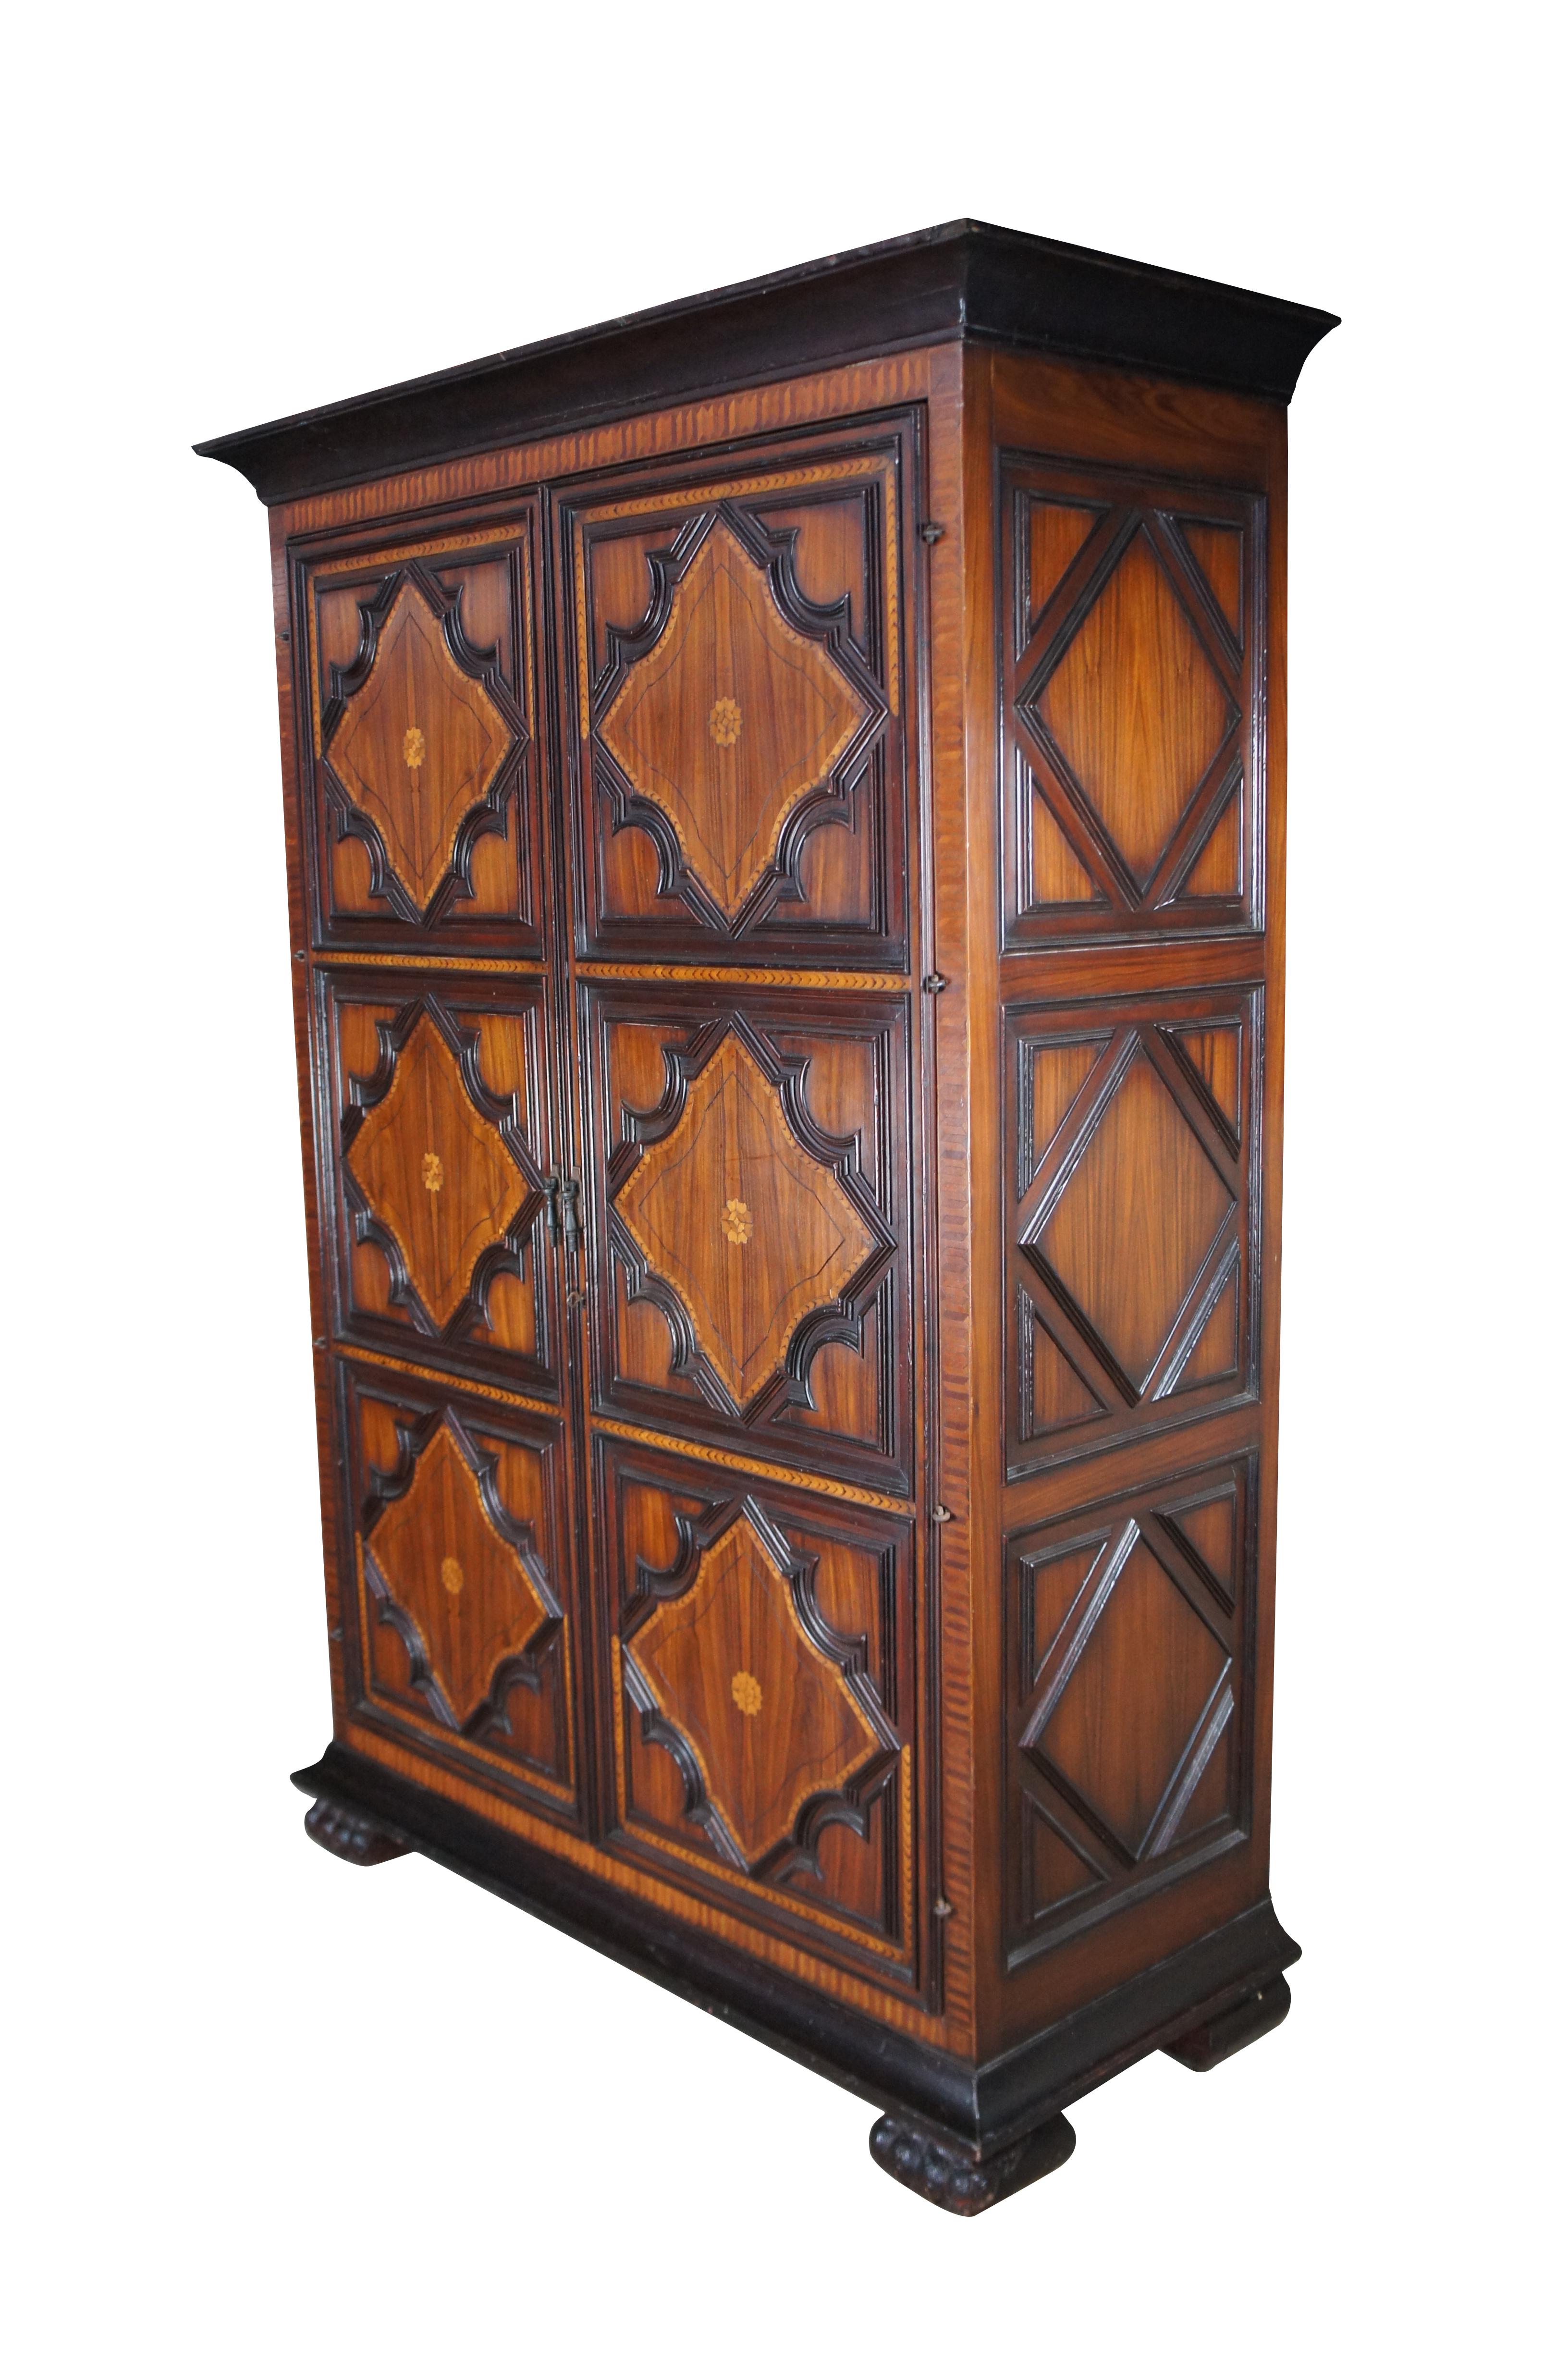 A breathtaking wardrobe by Alfonso Marina. Drawing inspiration from 18th Century designs with French Louis XIII and Spanish Colonial styling. The armoire is constructed from rosewood and mahogany with fruitwood marquetry and herringbone inlay.